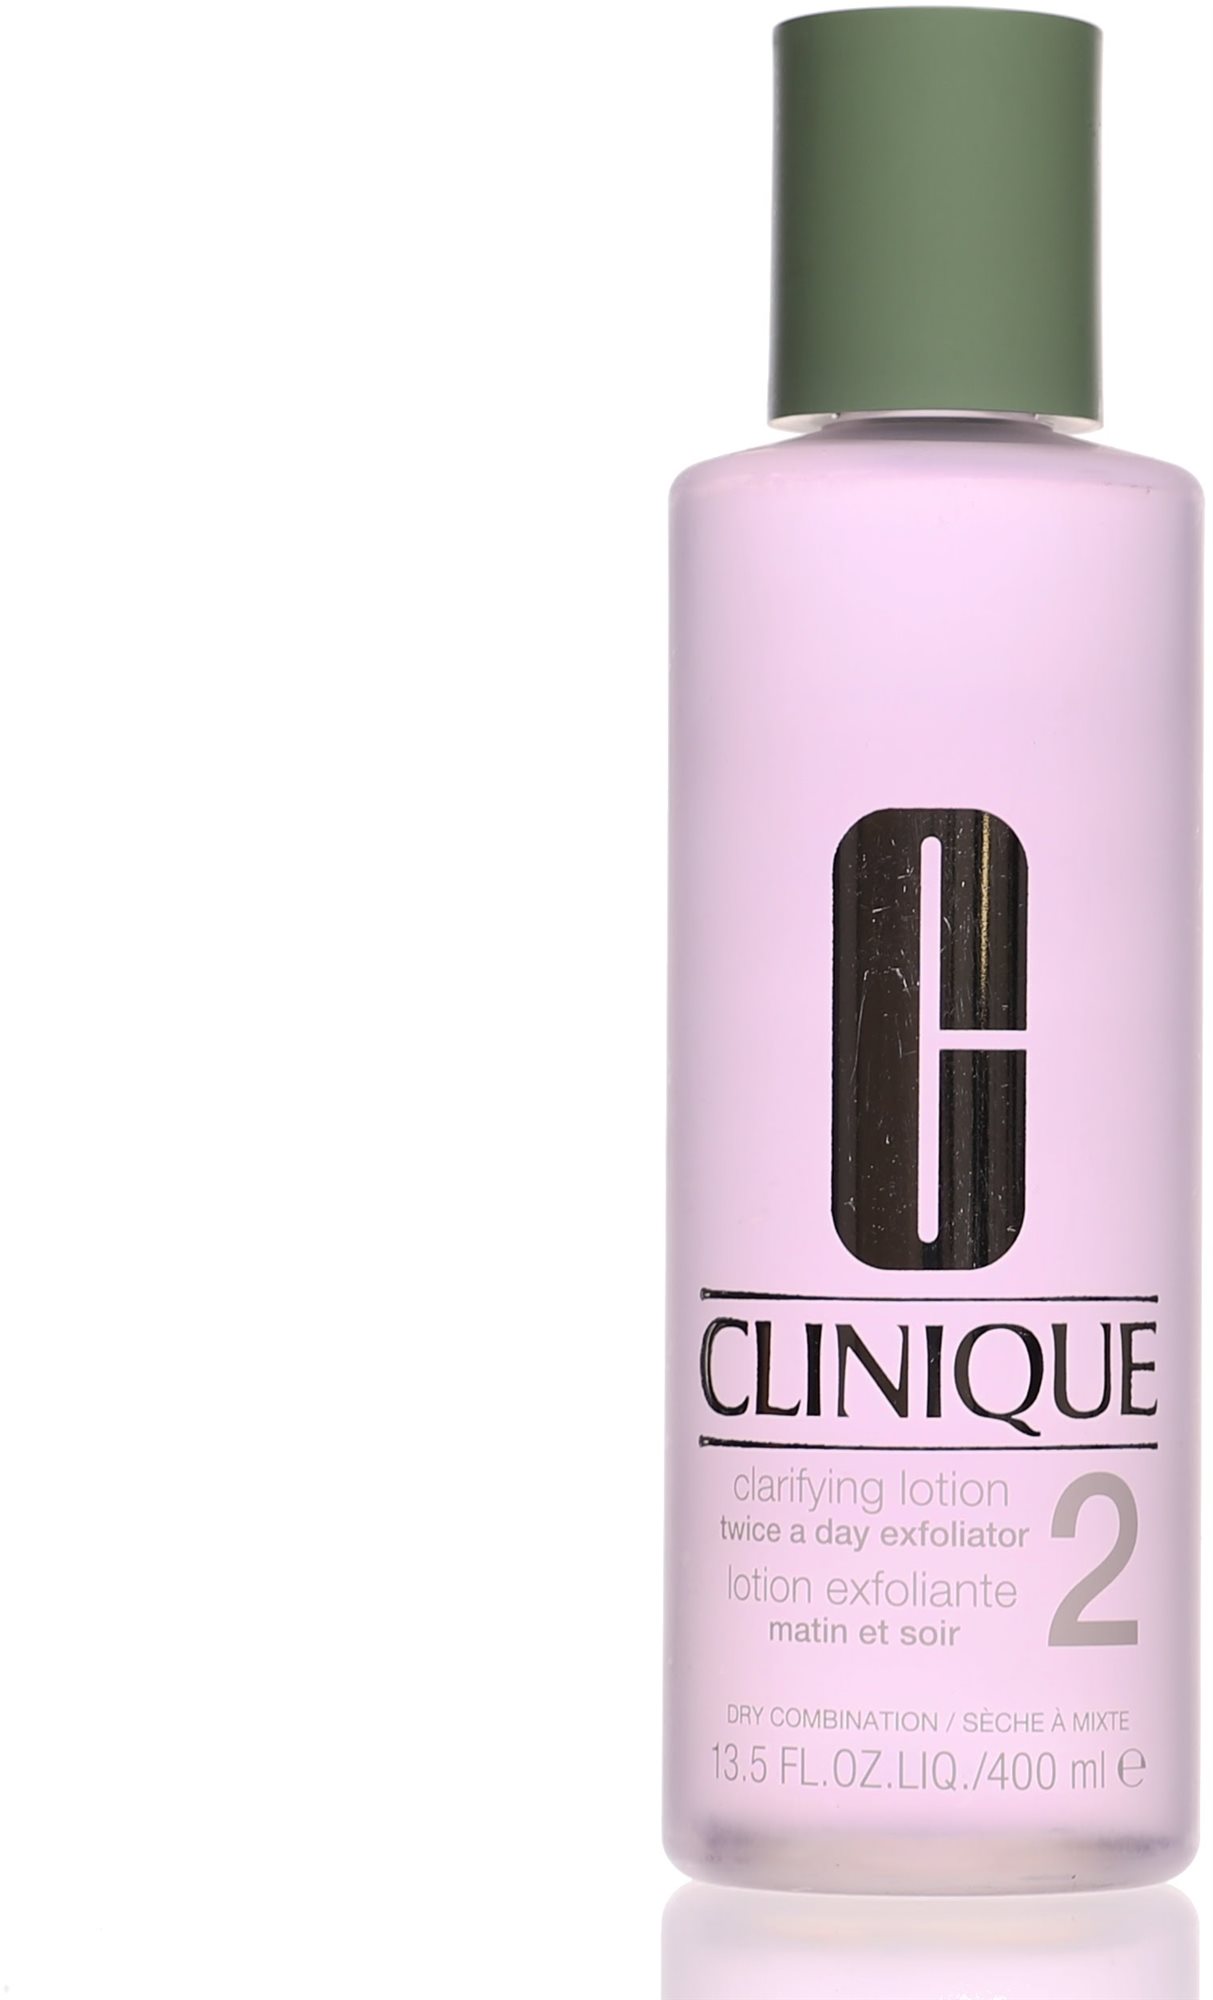 CLINIQUE Clarifying Lotion 2 400 ml